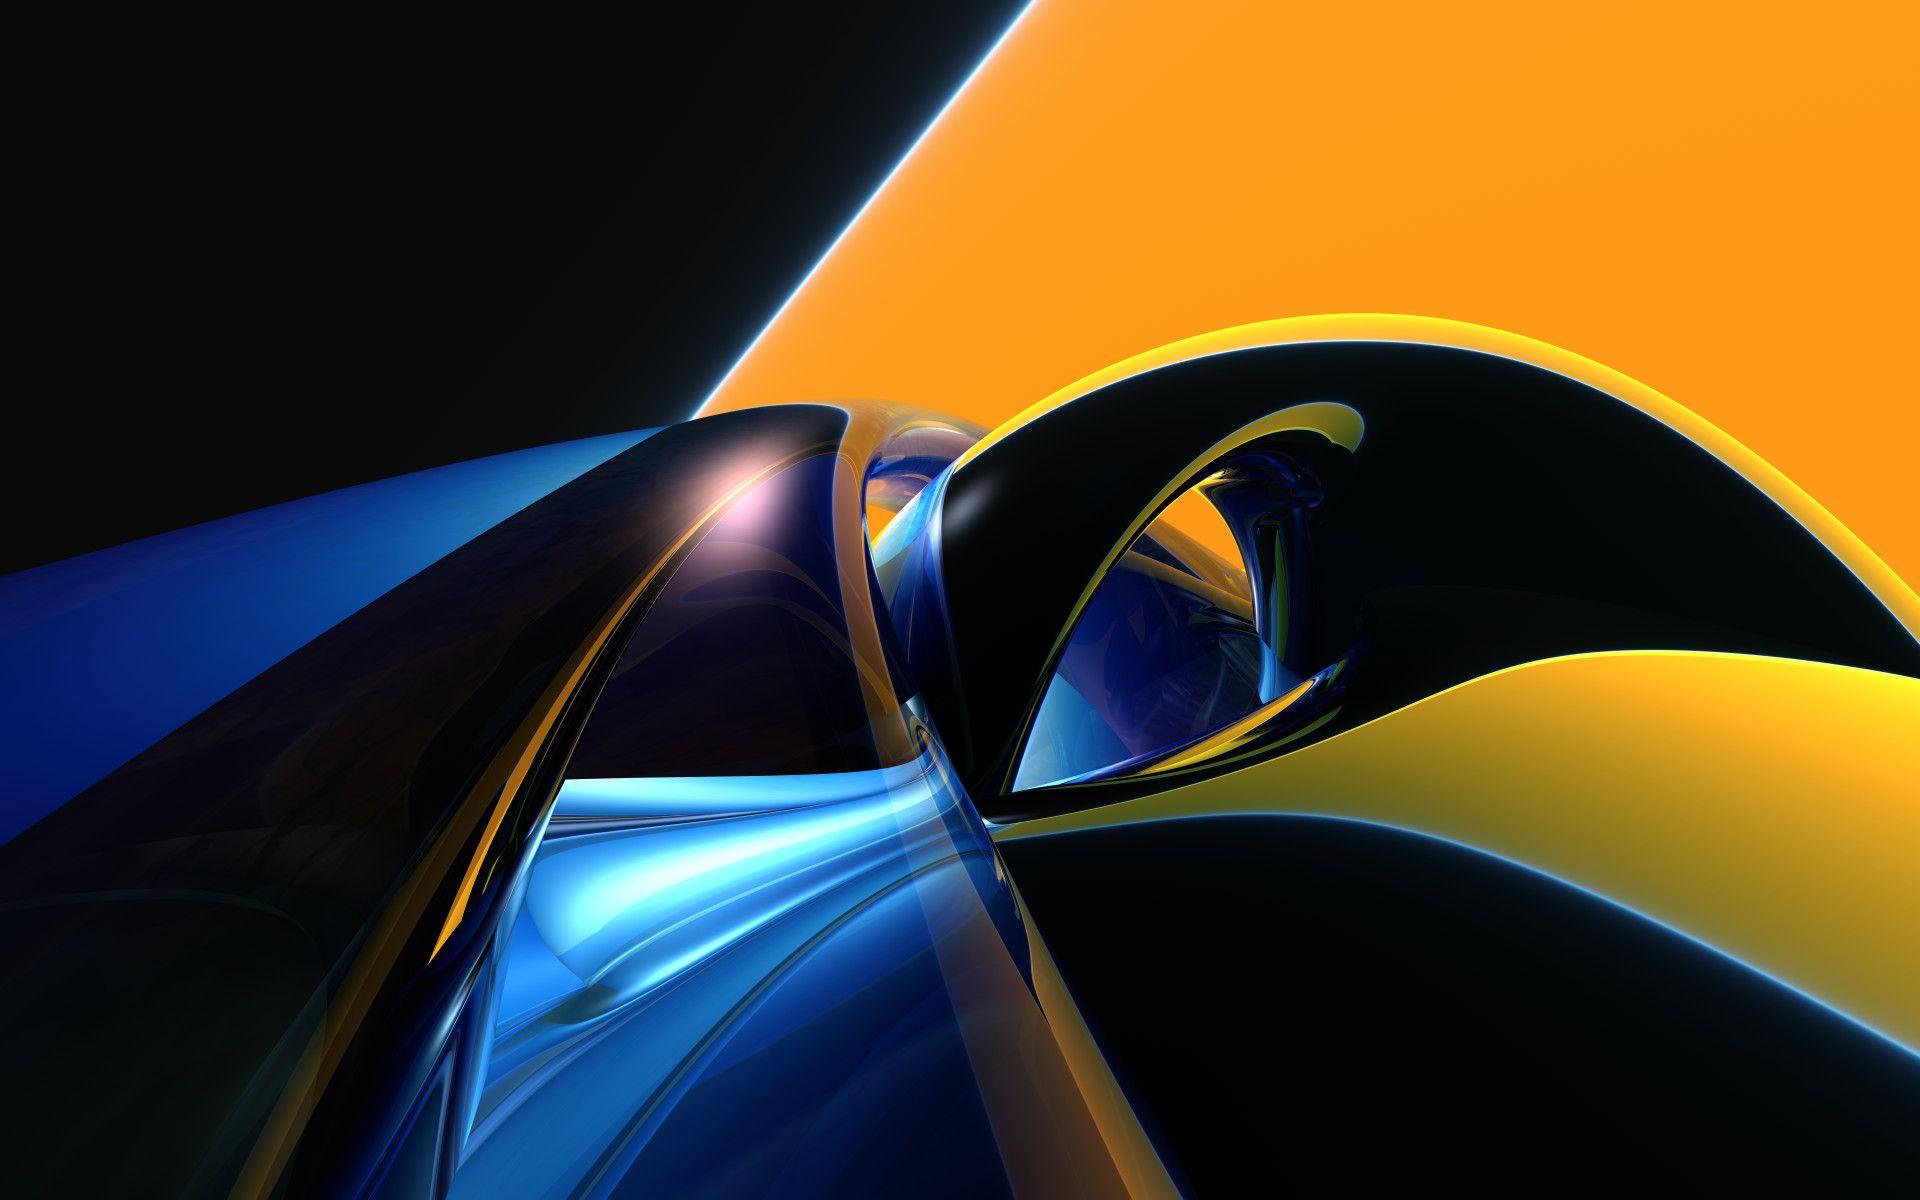 Wallpaper.wiki Free HD Blue Yellow Abstract Wallpaper PIC WPC009071